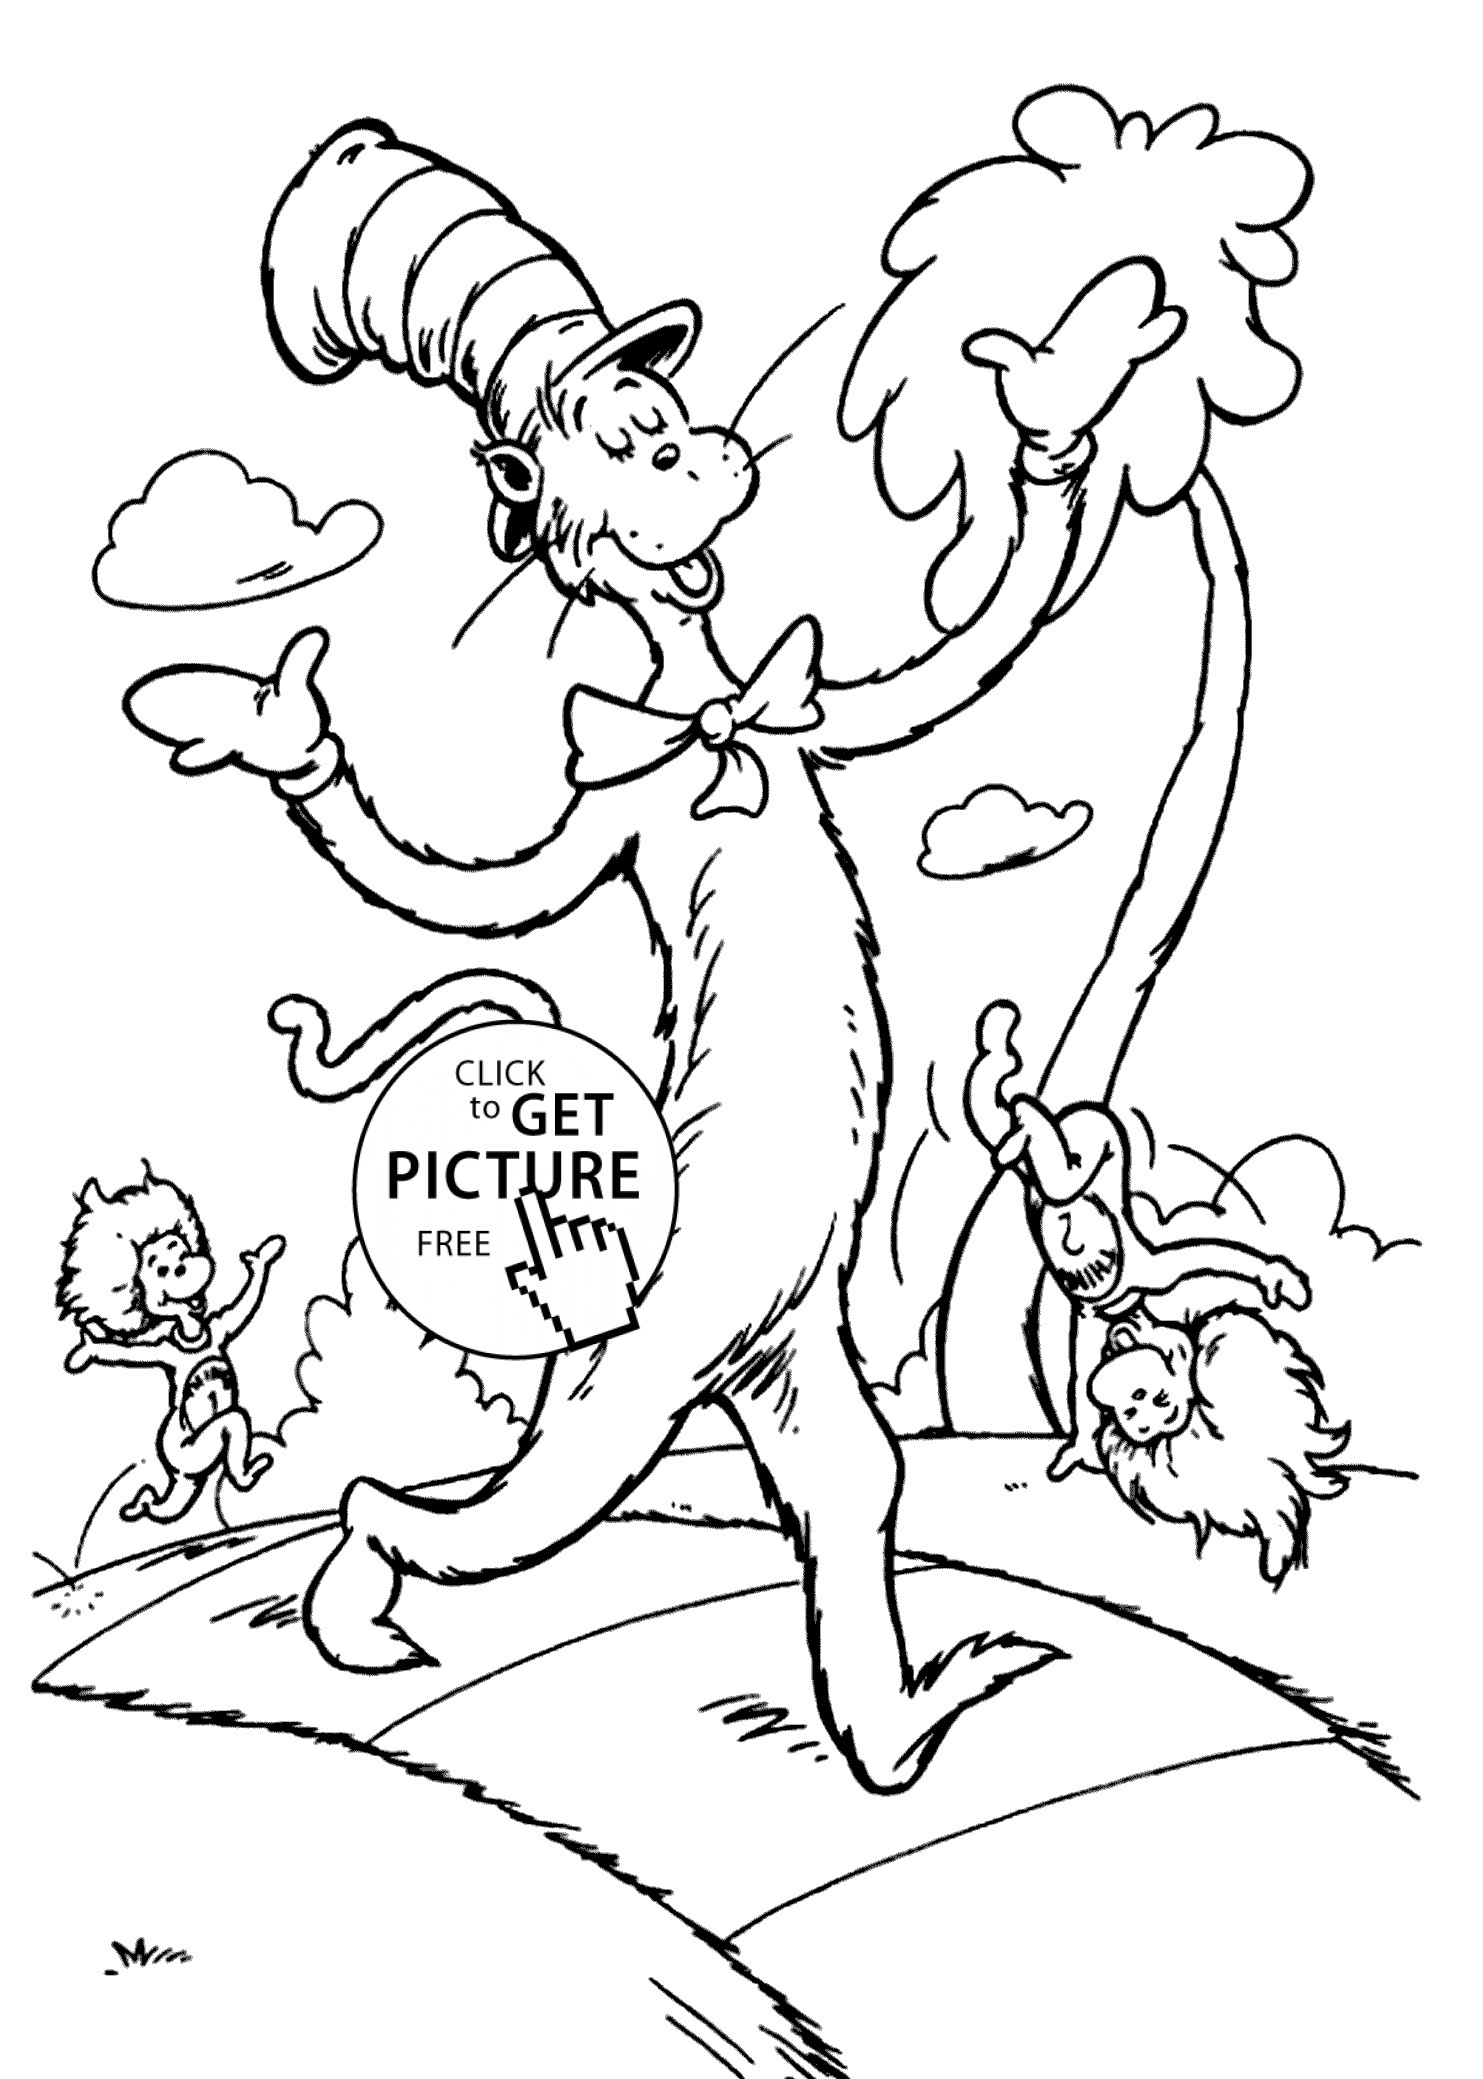 Free Printable Dr Seuss Coloring Pages
 The Сat in the hat and promenade coloring pages for kids